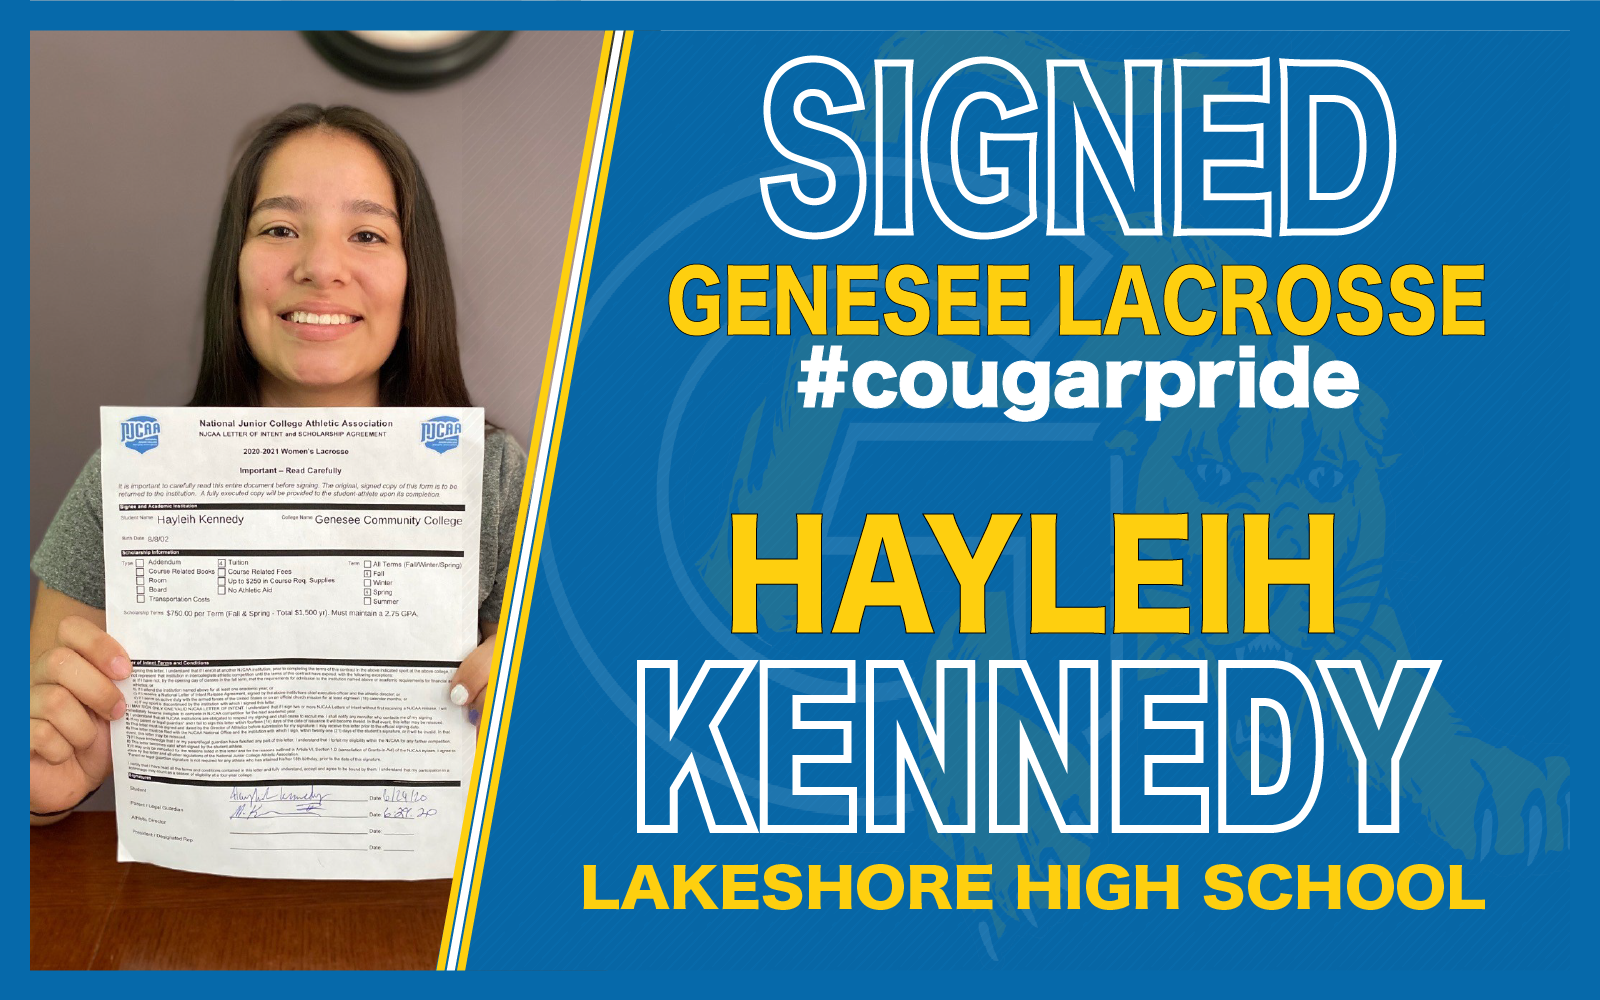 Hayleig Kennedy has signed her letter of intent to join the upcoming Genesee Women's lacrosse season